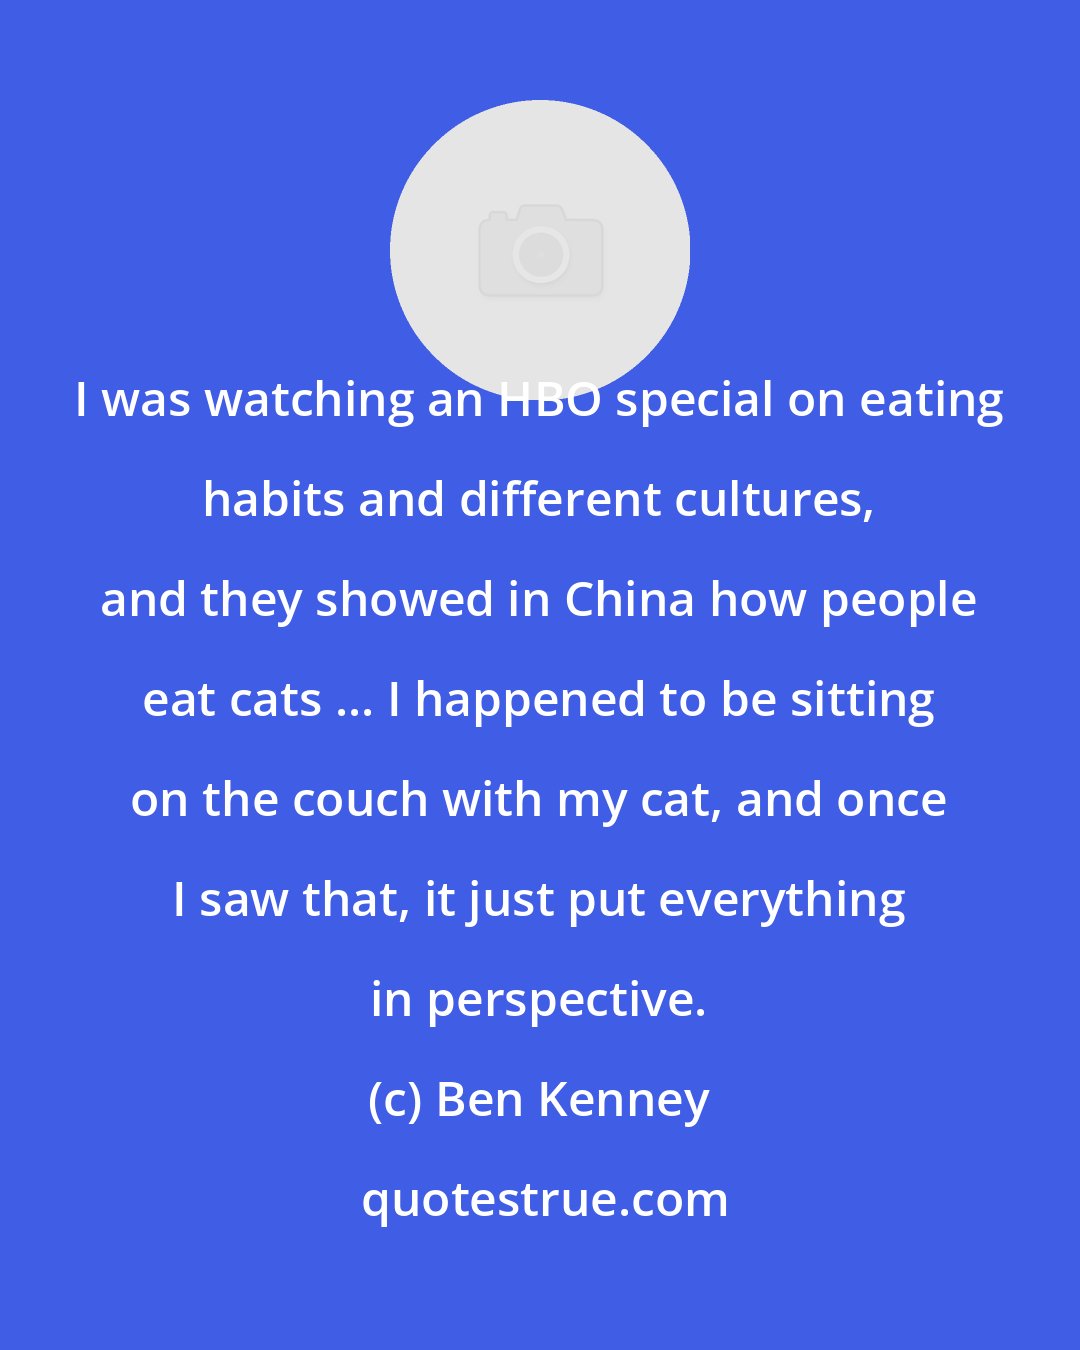 Ben Kenney: I was watching an HBO special on eating habits and different cultures, and they showed in China how people eat cats ... I happened to be sitting on the couch with my cat, and once I saw that, it just put everything in perspective.